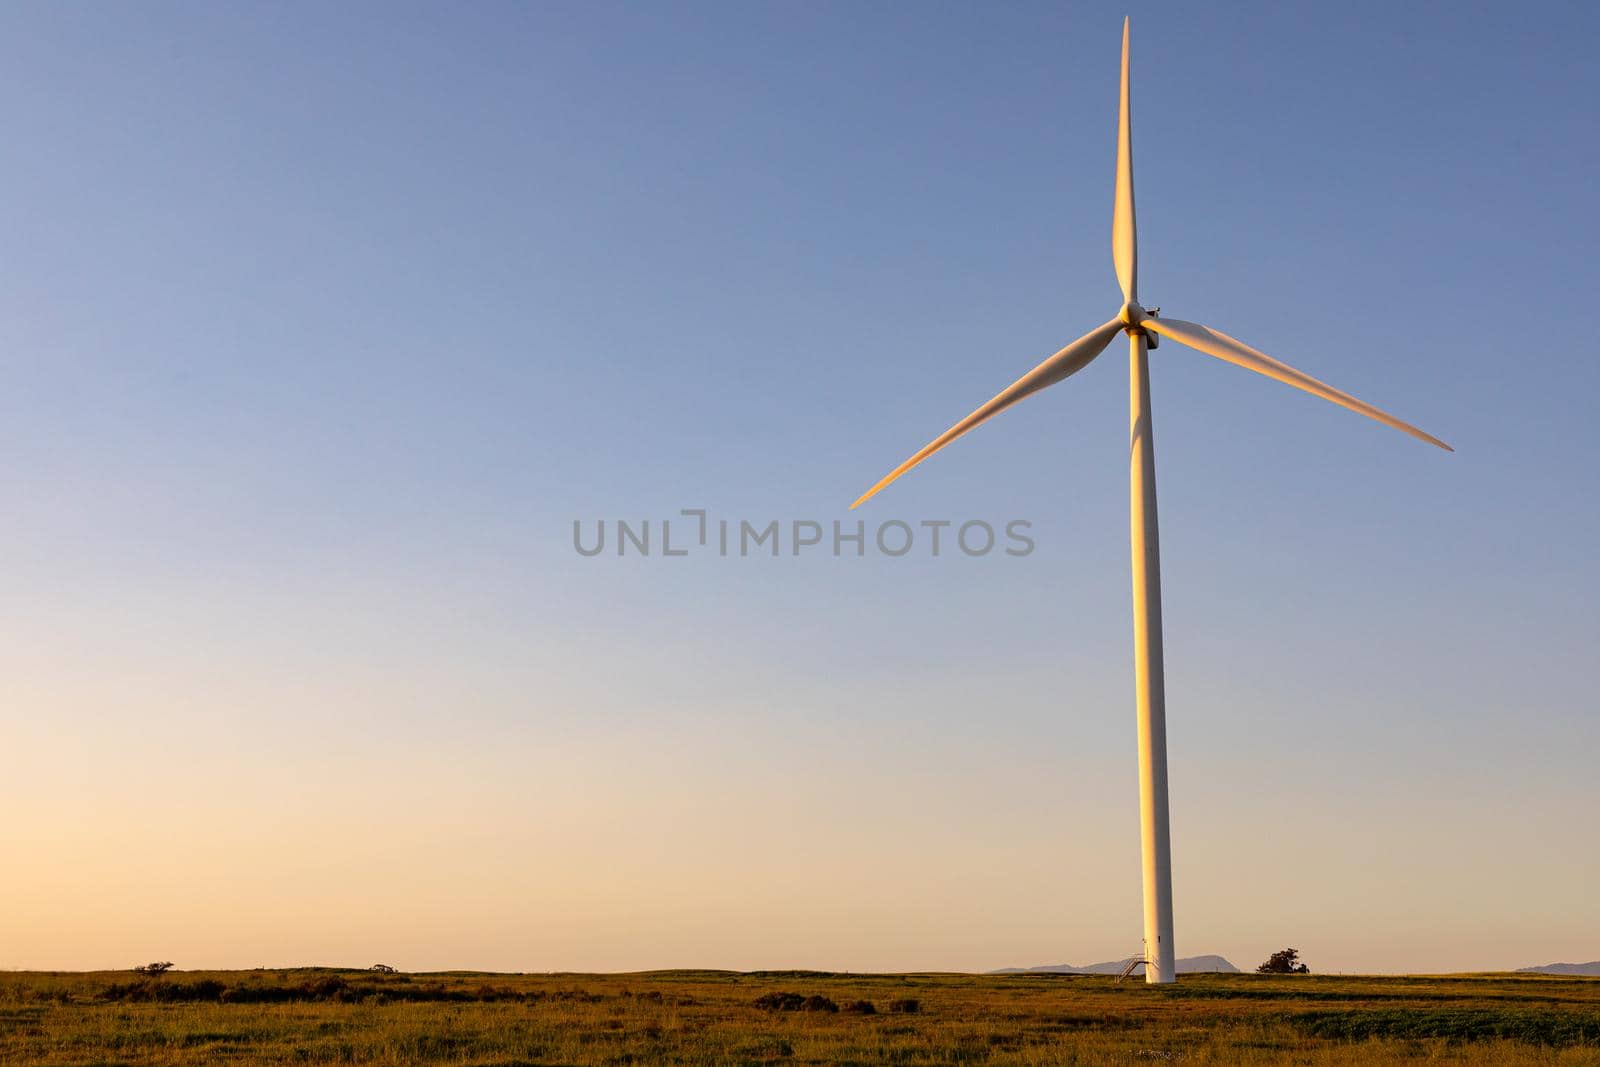 General view of wind turbine in countryside landscape during sunset by Wavebreakmedia